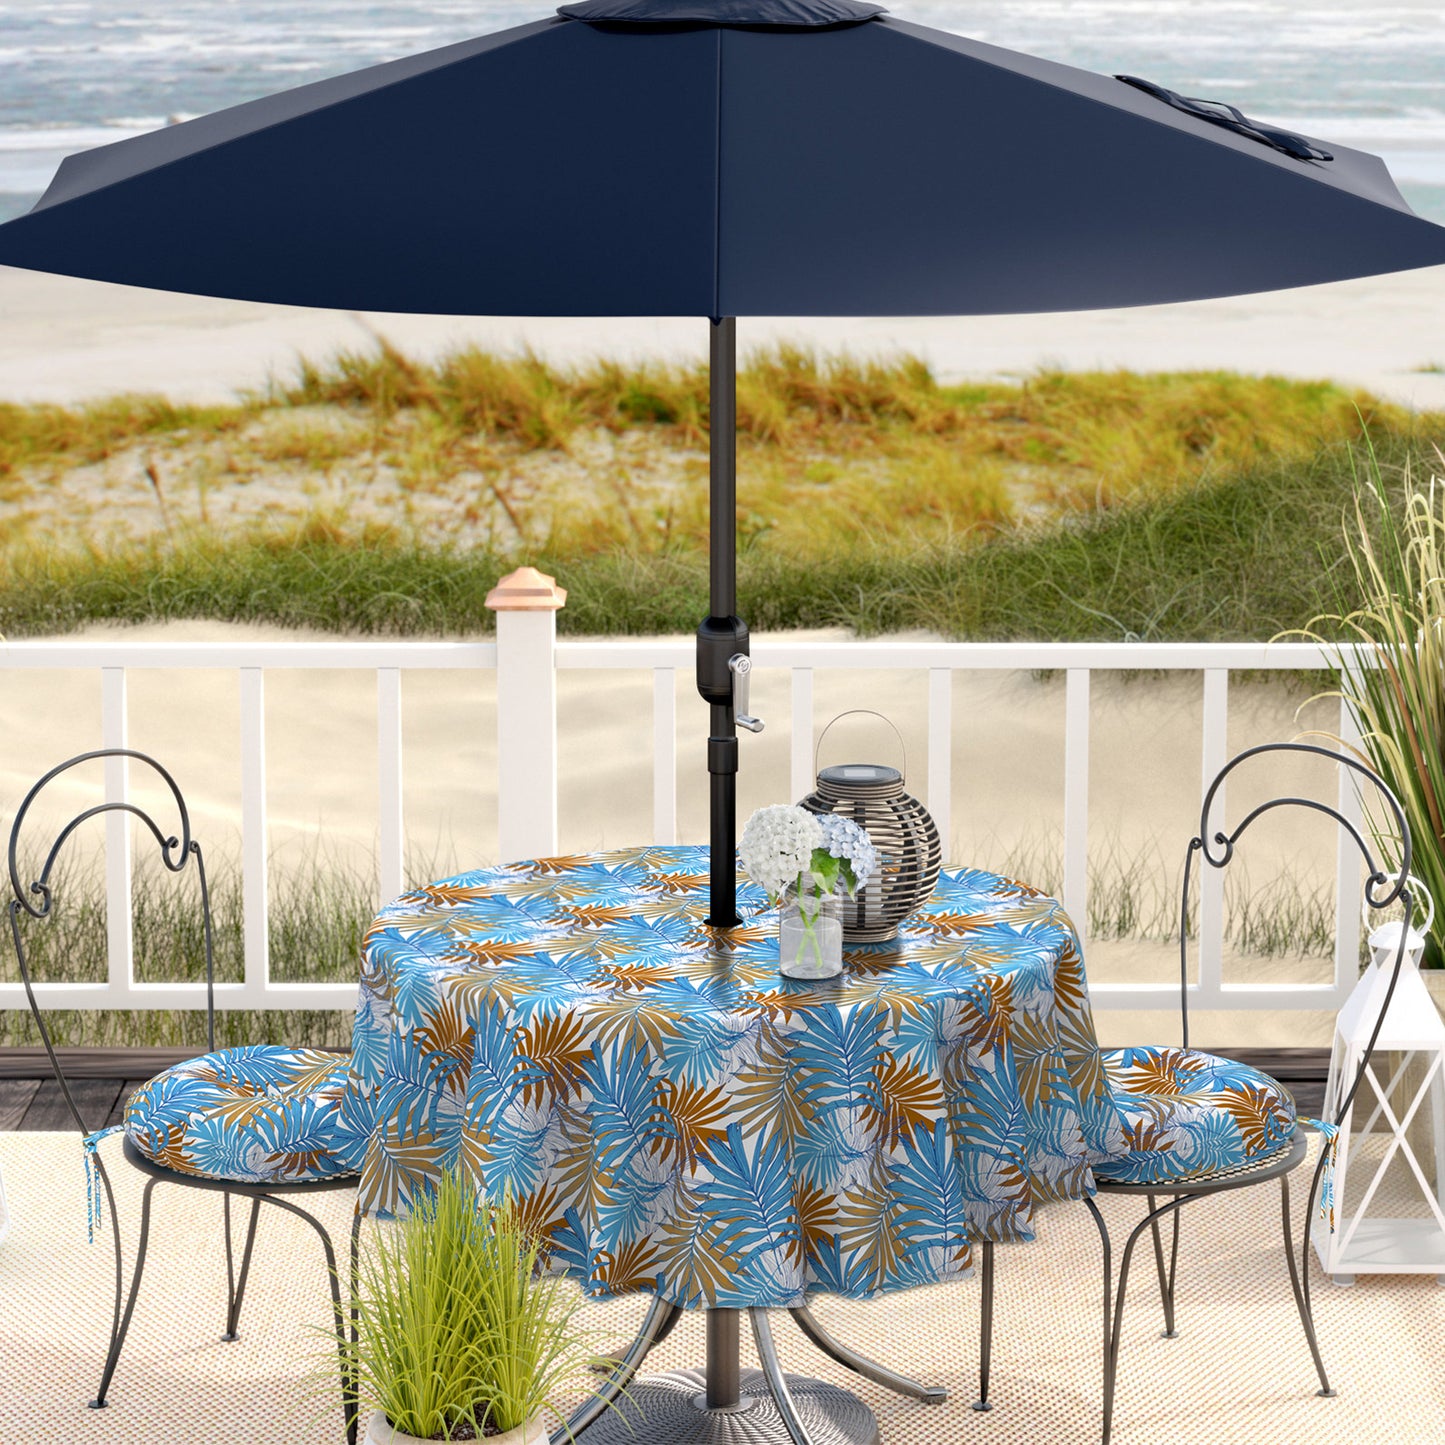 Melody Elephant Outdoor/Indoor Round Tablecloth with Umbrella Hole Zipper, Decorative Circular Table Cover for Home Garden, 60 Inch, Piermont Leaves Blue